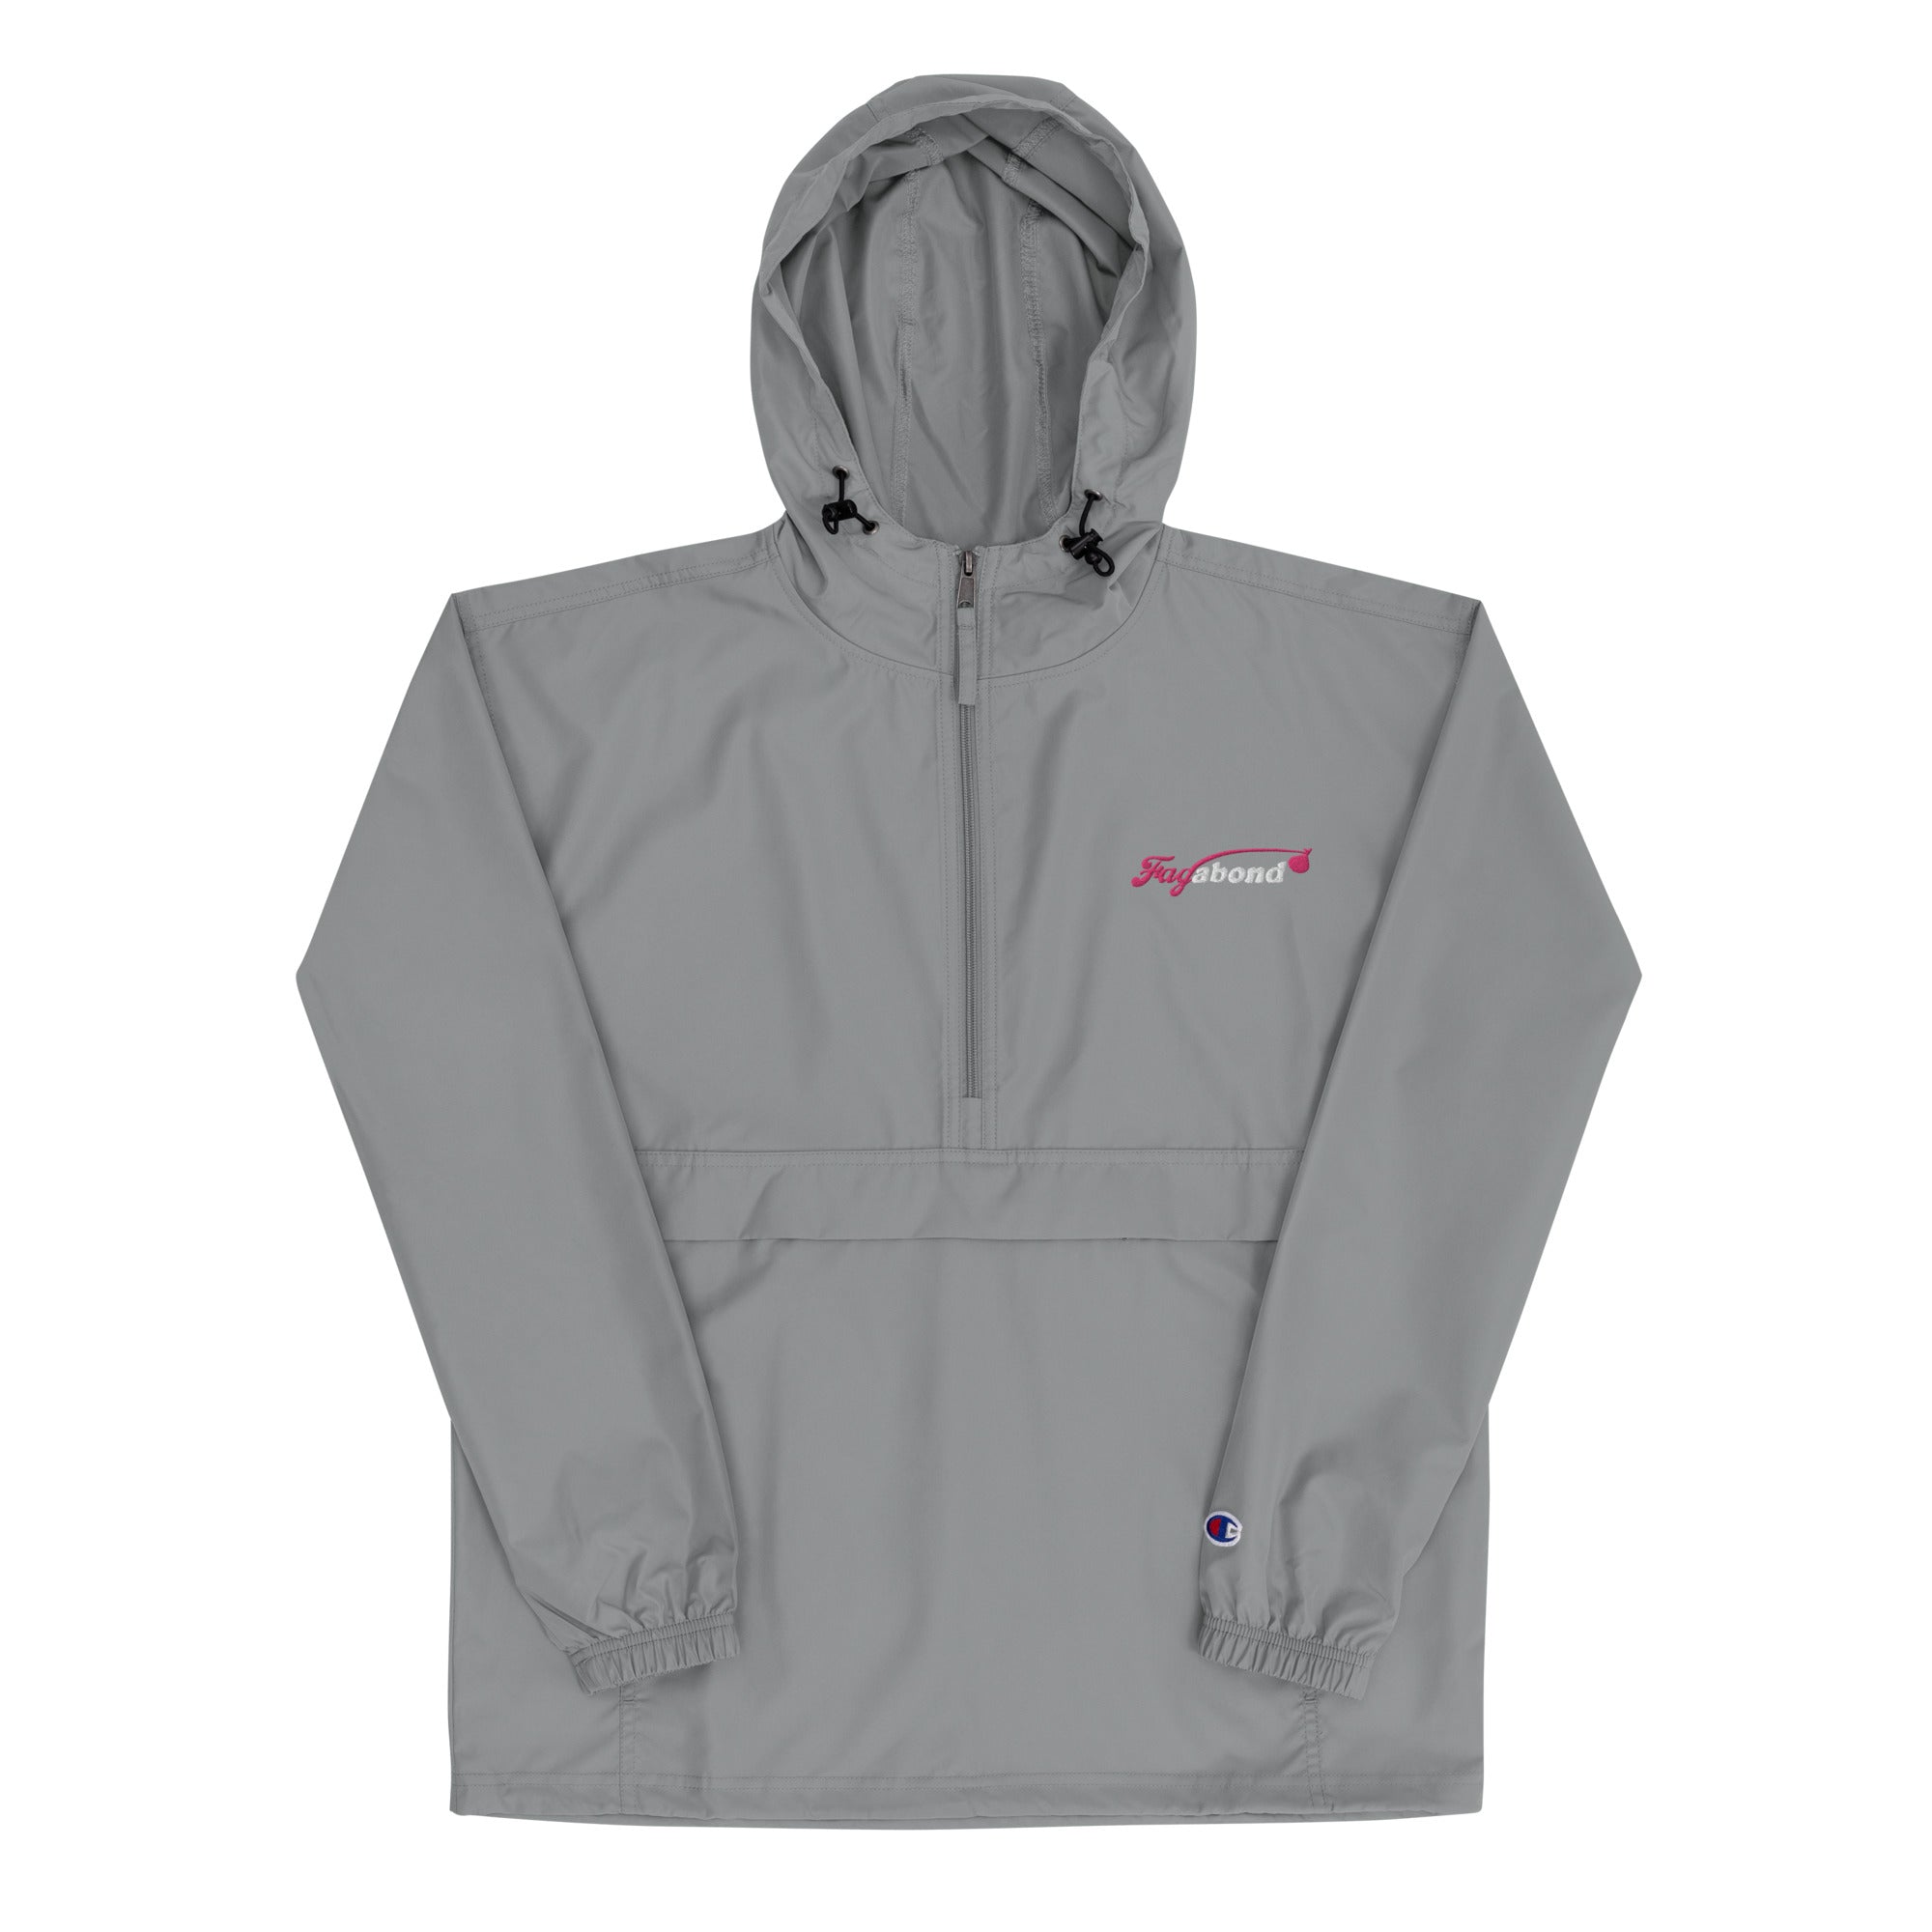 Fagabond Embroidered Champion Packable Jacket